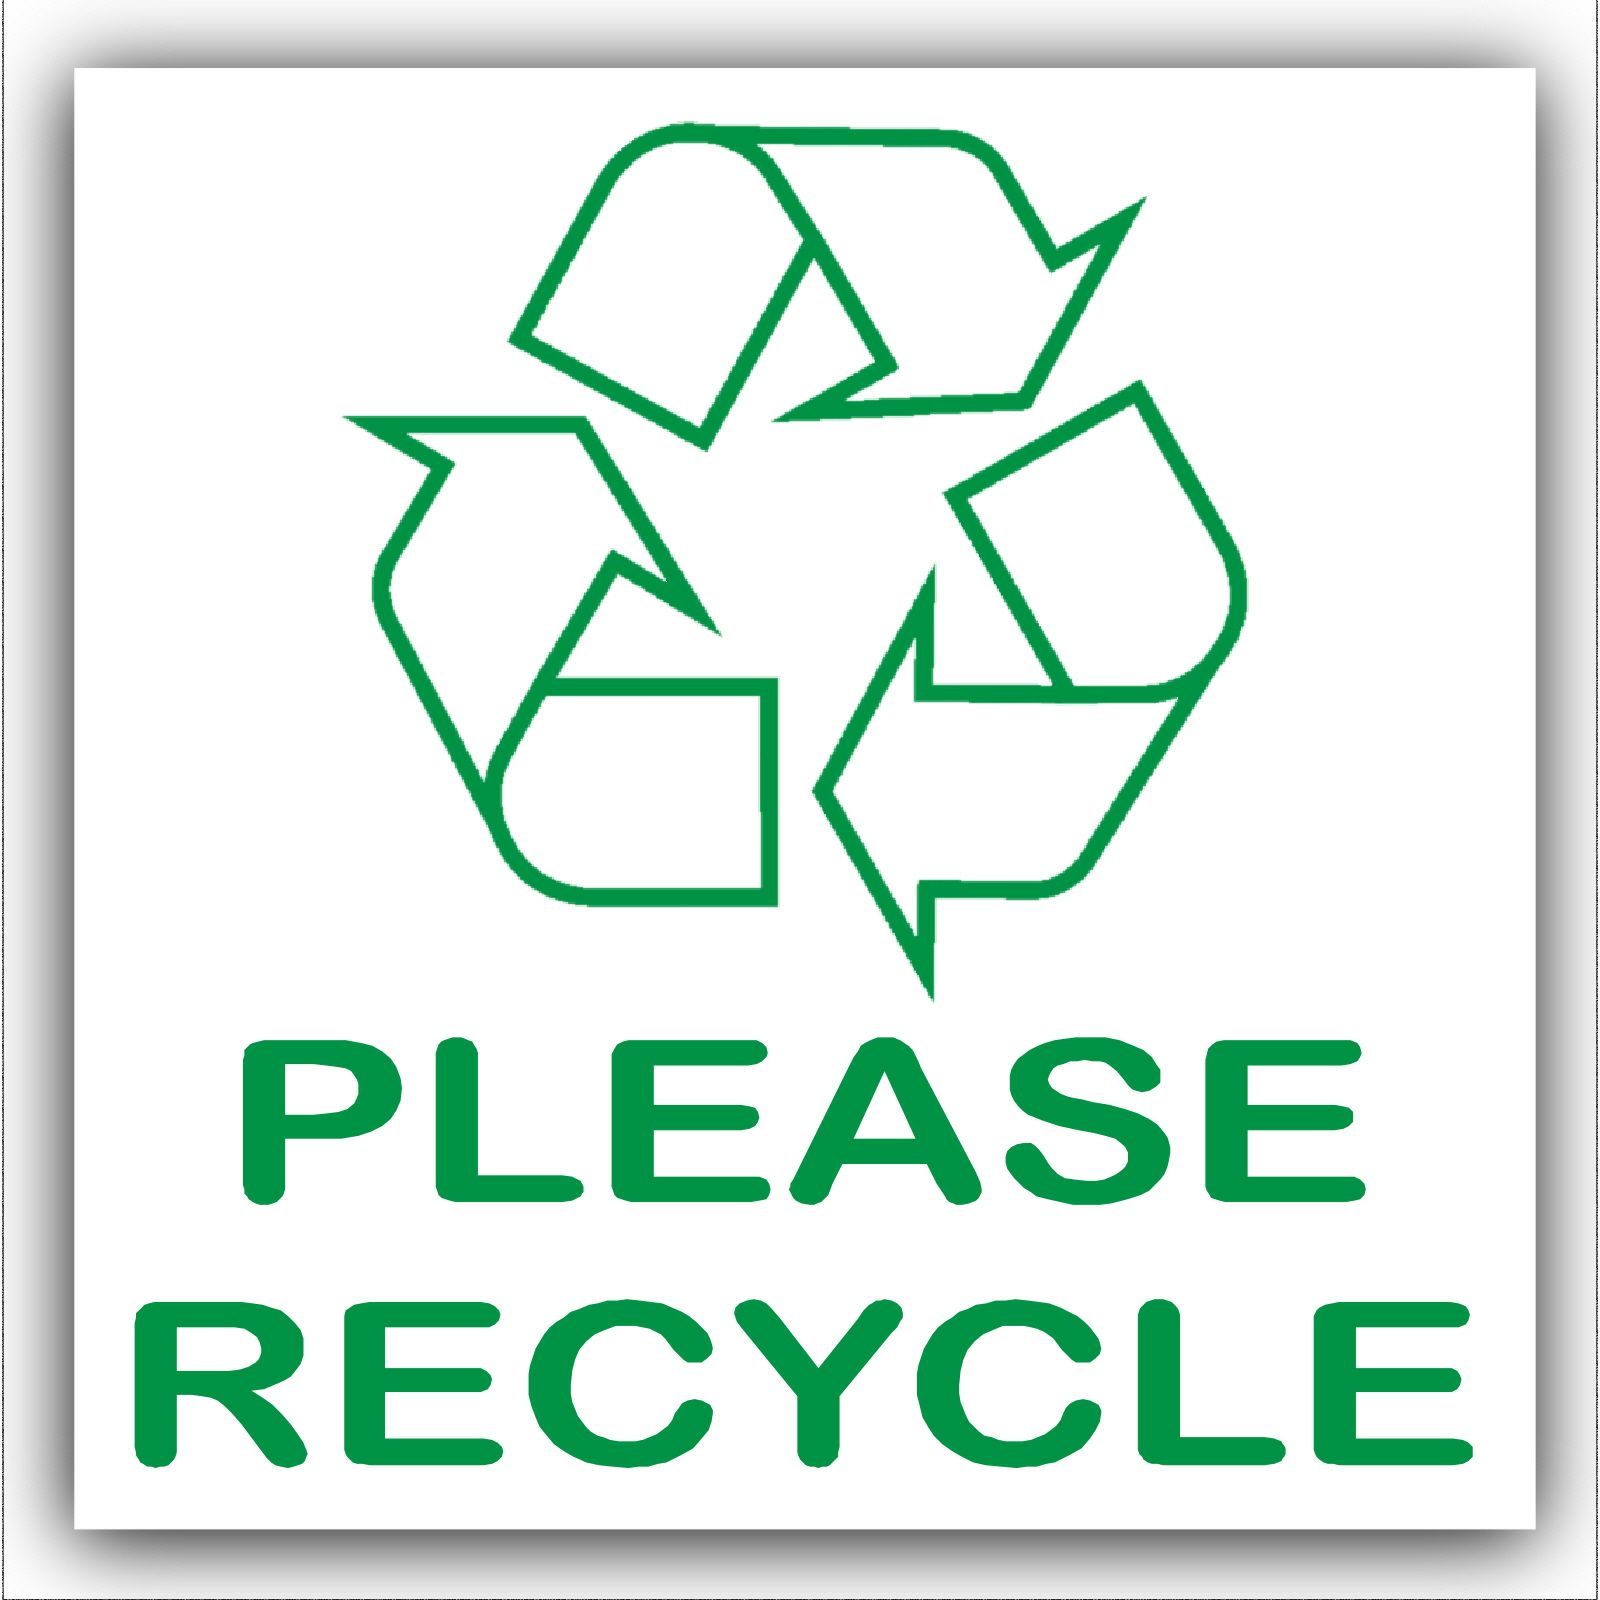 Please Recycle Recycling Bin Adhesive Sticker-Recycle Logo Sign ...